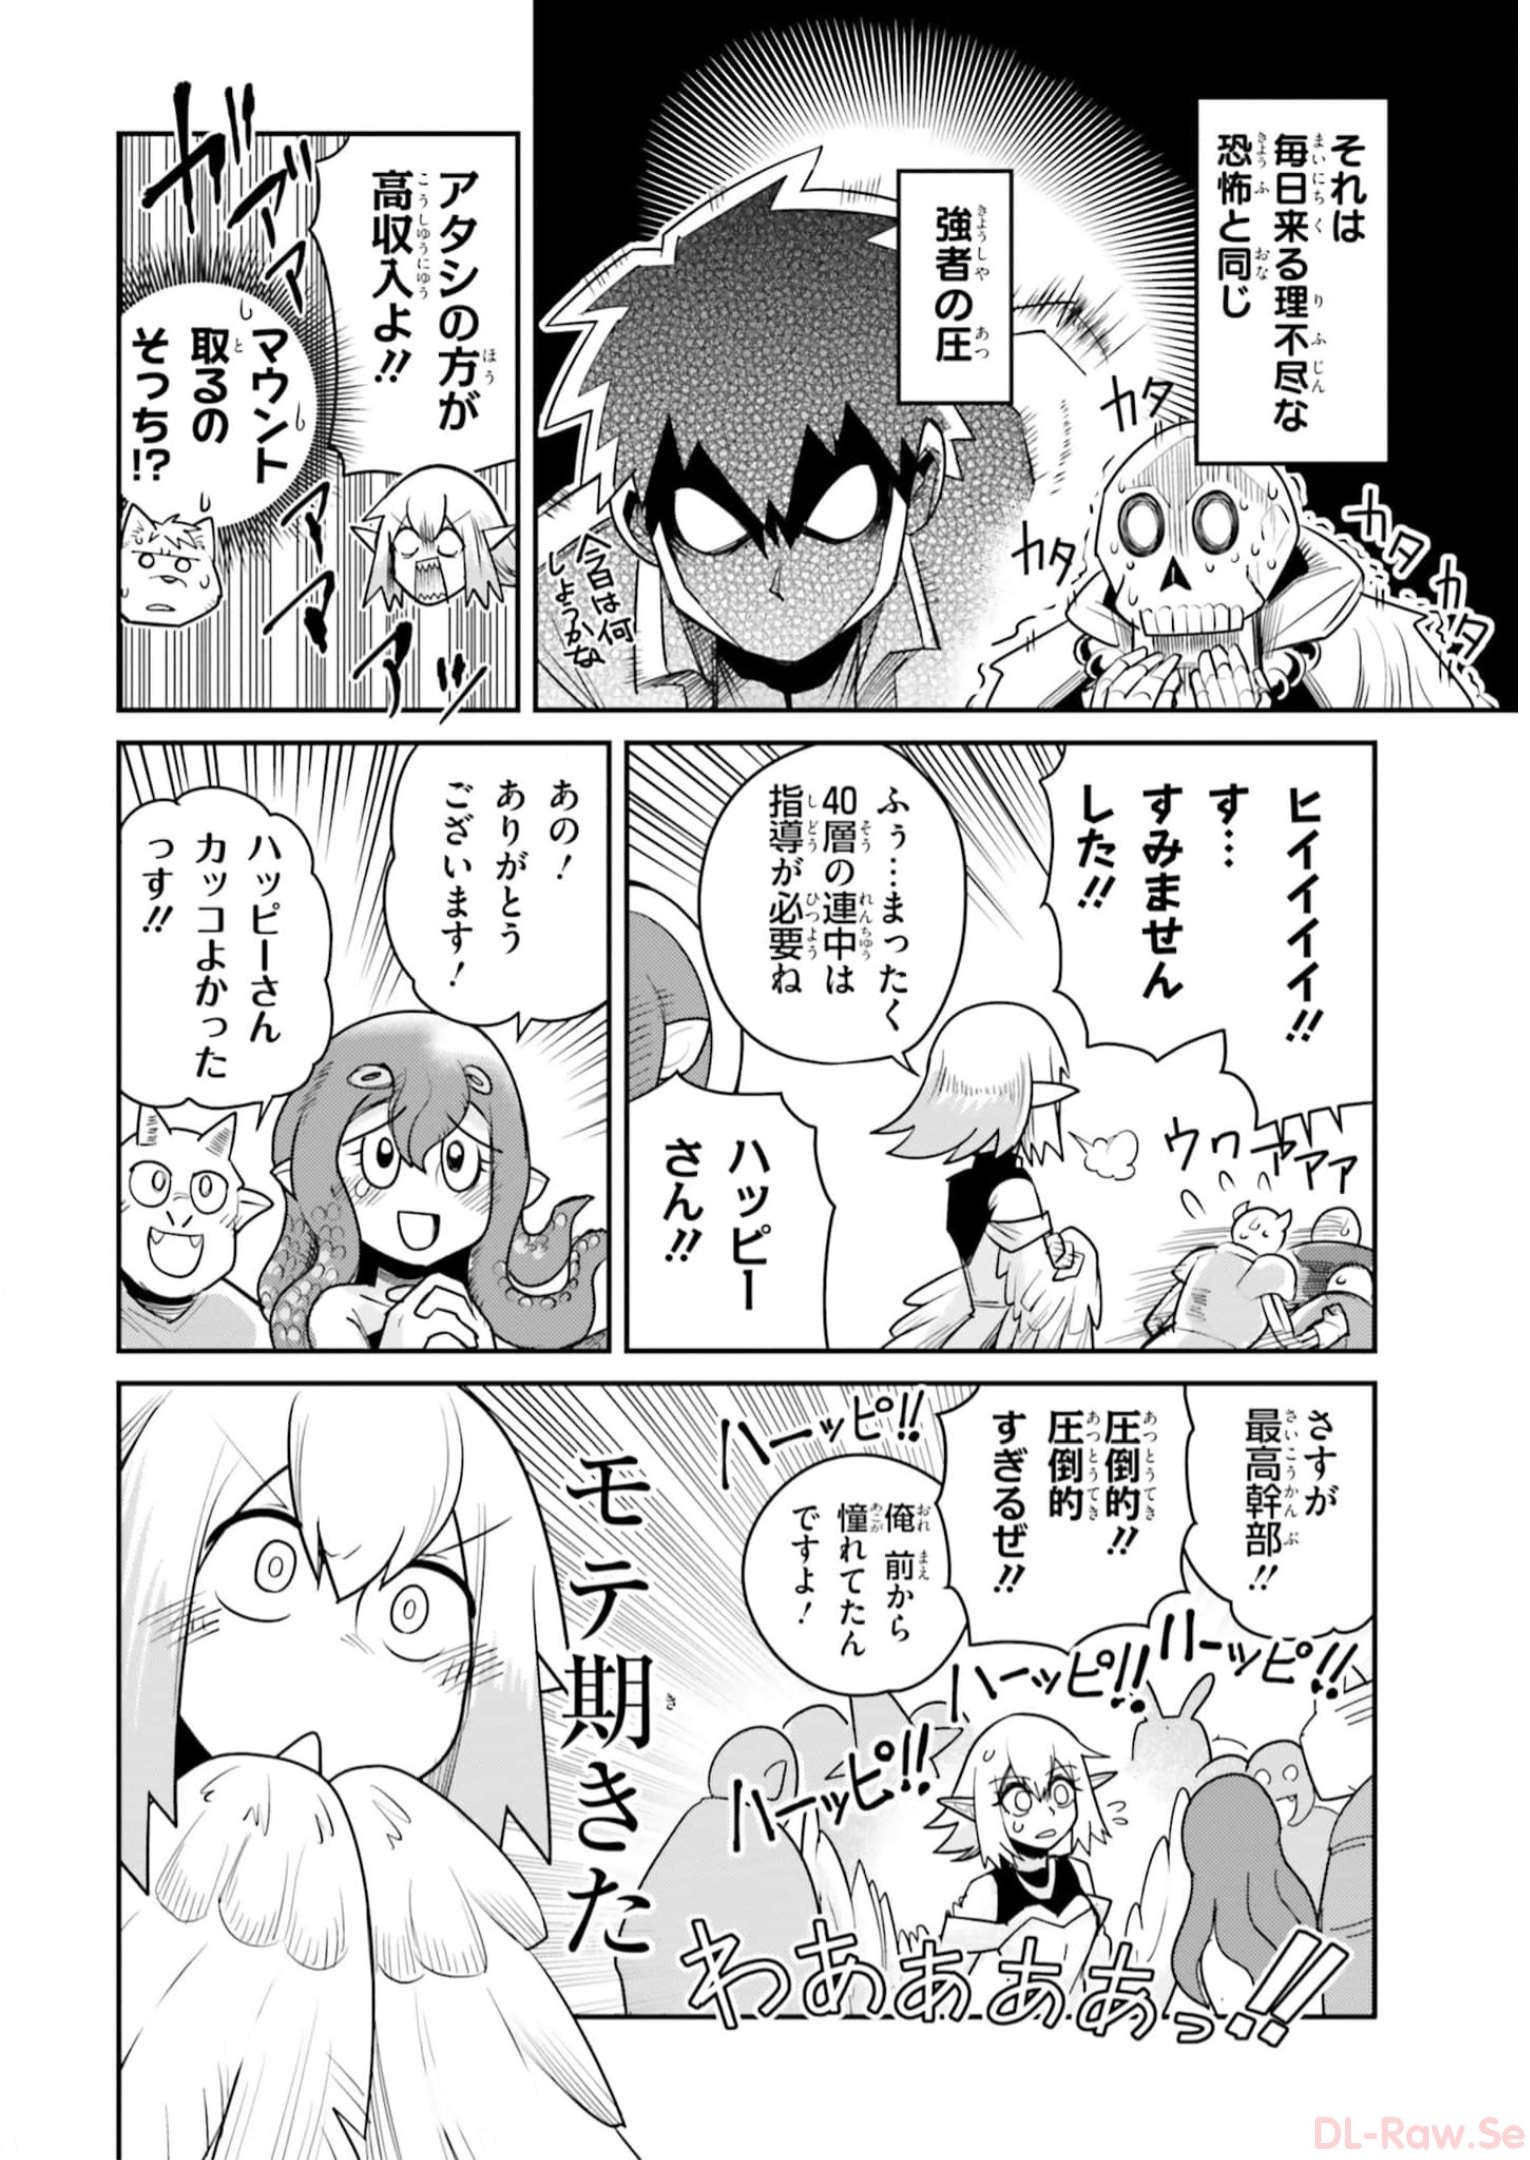 Dungeon Friends Forever Dungeon's Childhood Friend ダンジョンの幼なじみ 第14話 - Page 12